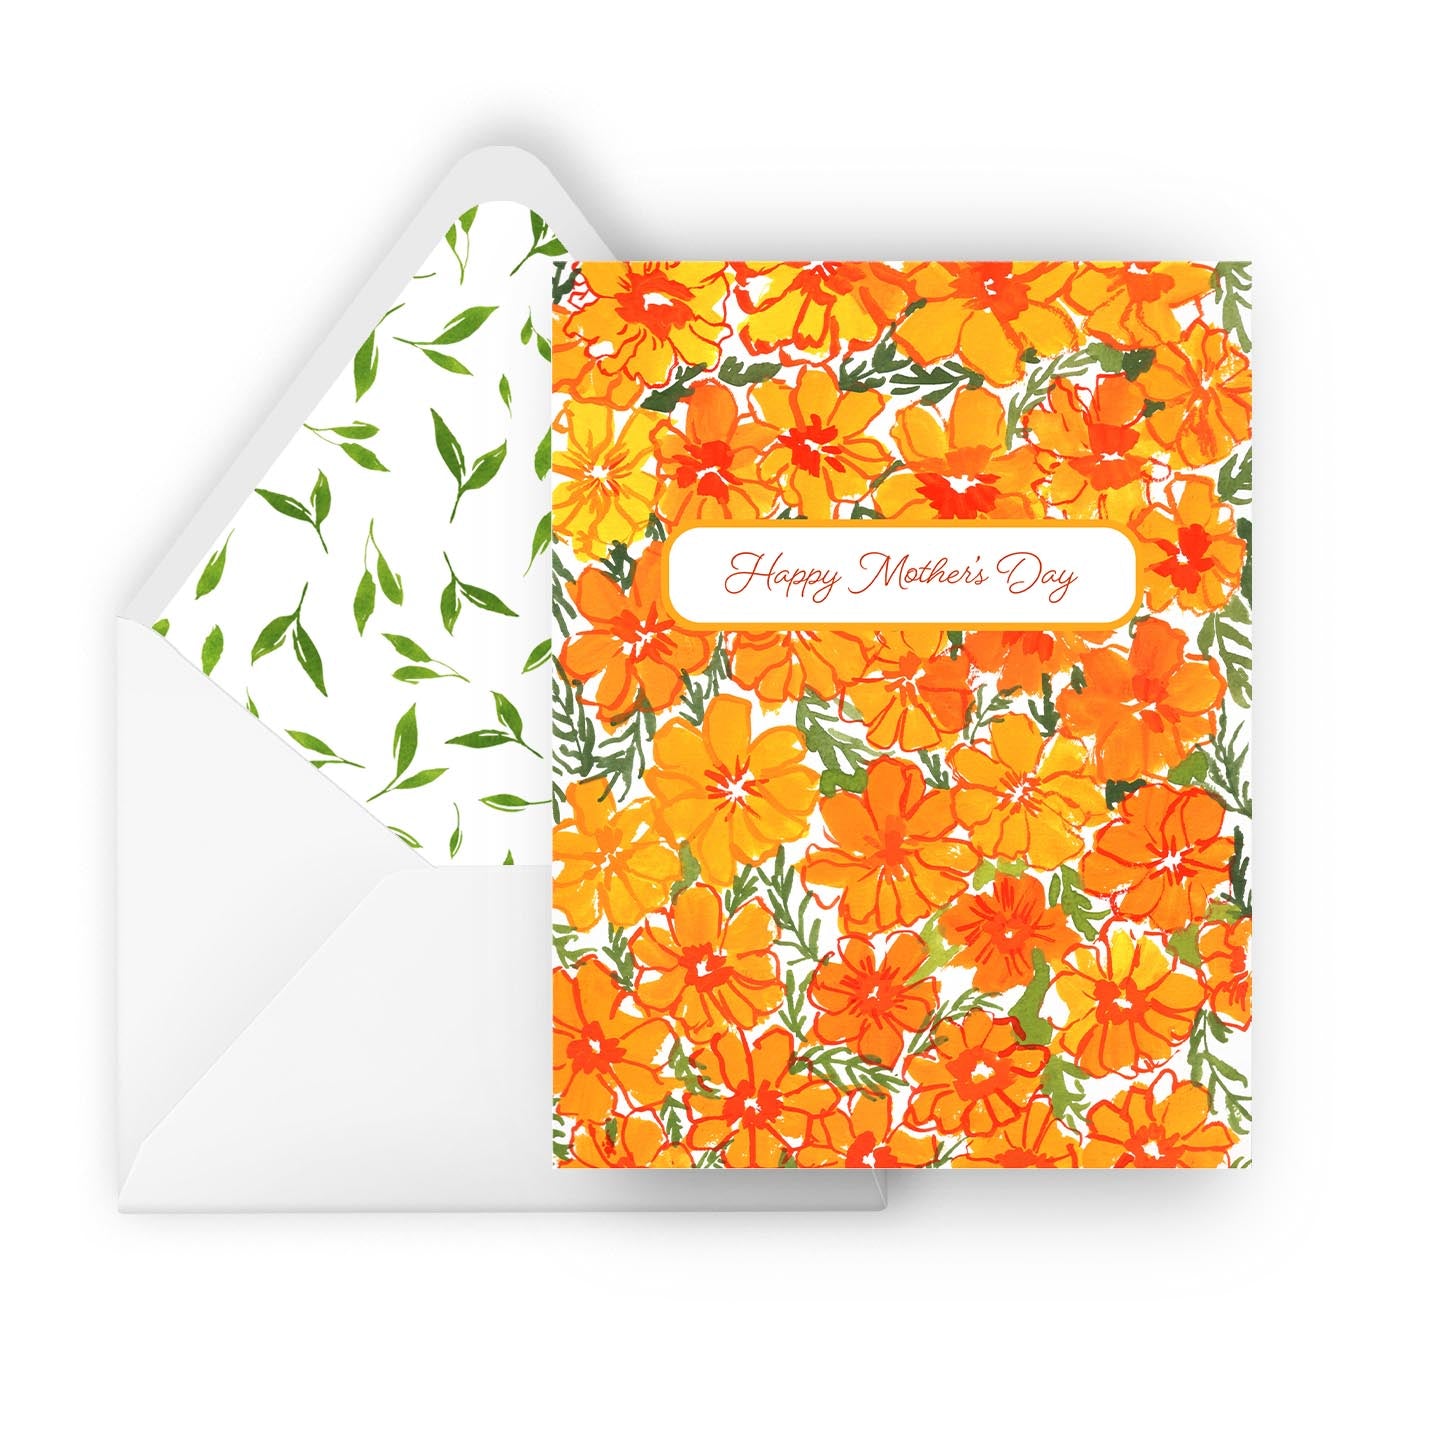 mother's day - marigolds greeting card